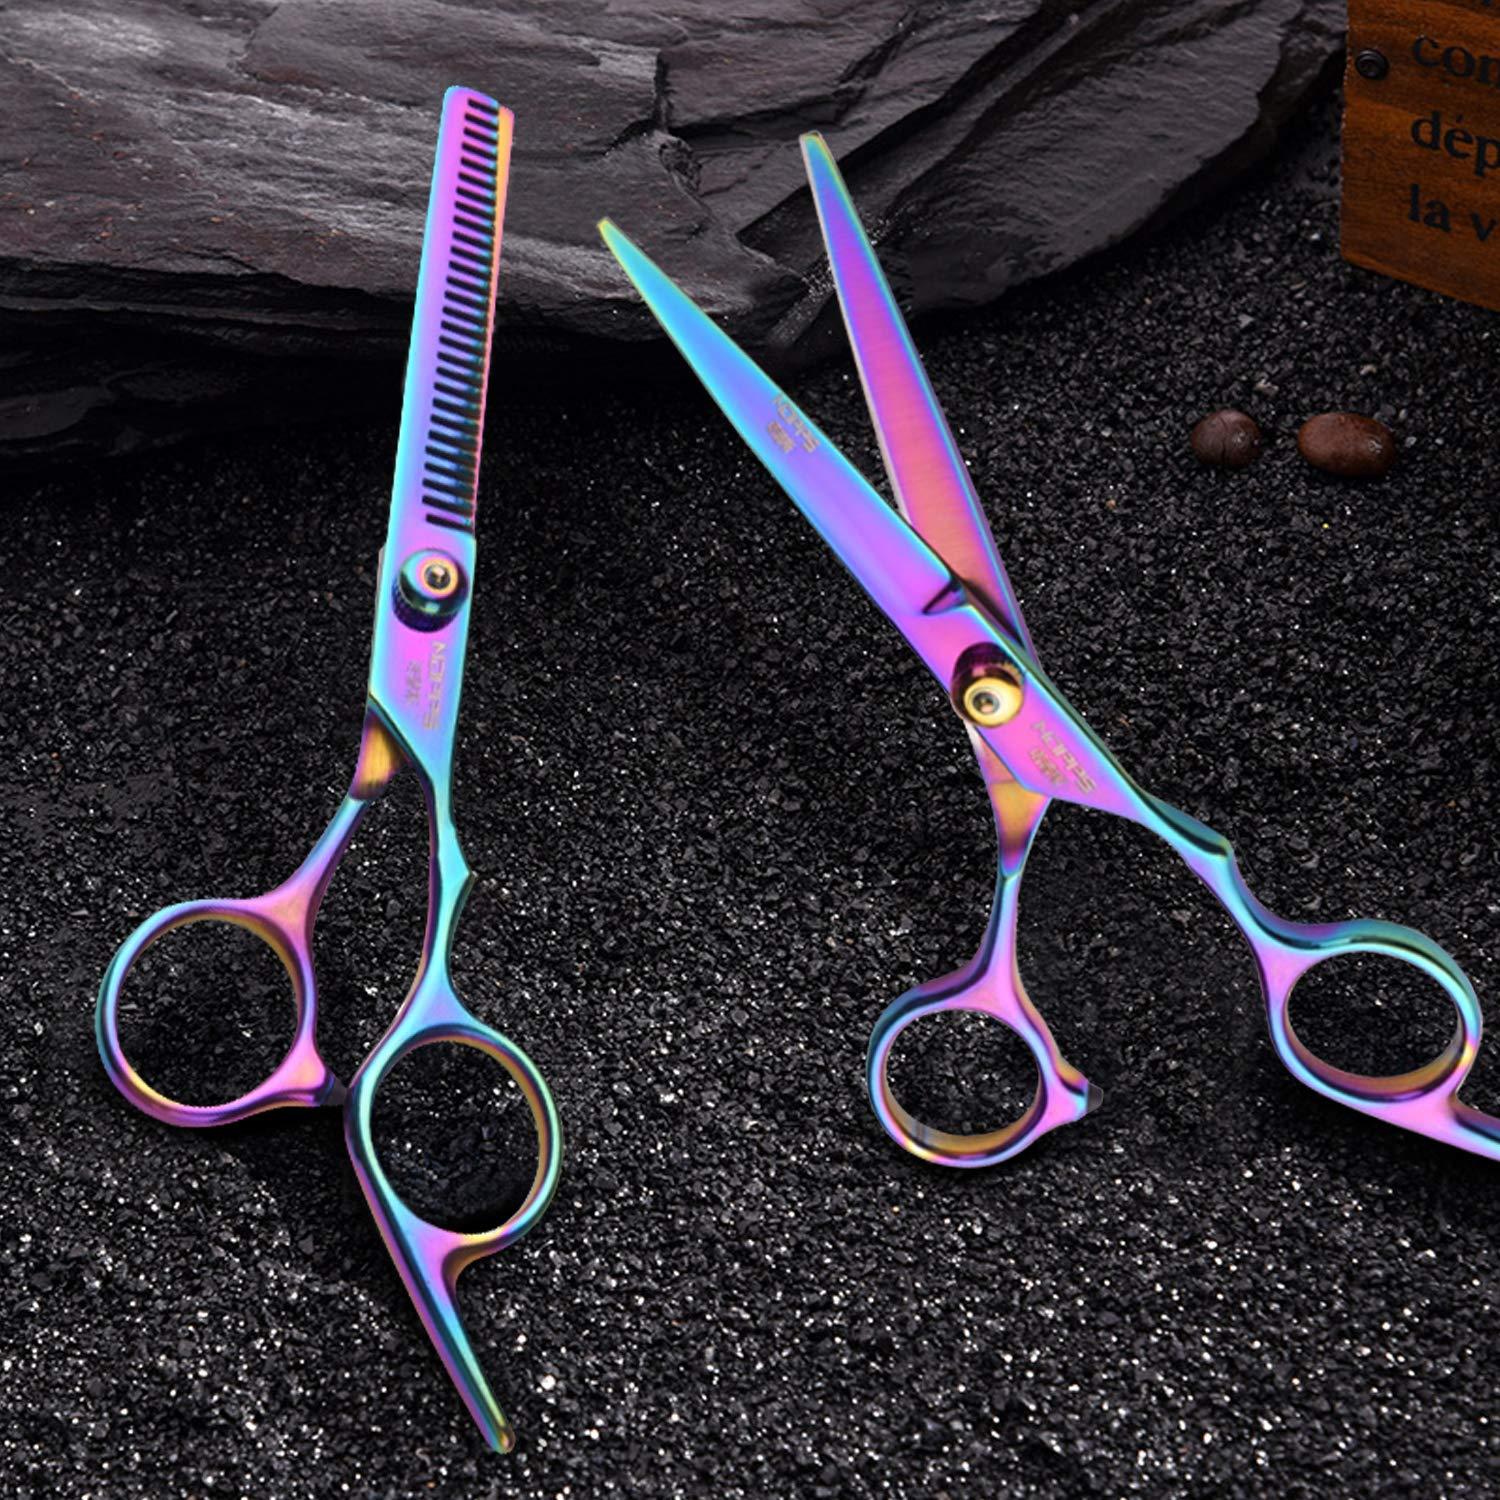 Hair Cutting Scissors Kits, 11Pcs Professional Haircut Scissors Kit with  Comb, Clips, Cape, New Craftsmanship Stainless Steel Hairdressing Thinning  Shears Set for Barber, Salon, Home (multicolour01)